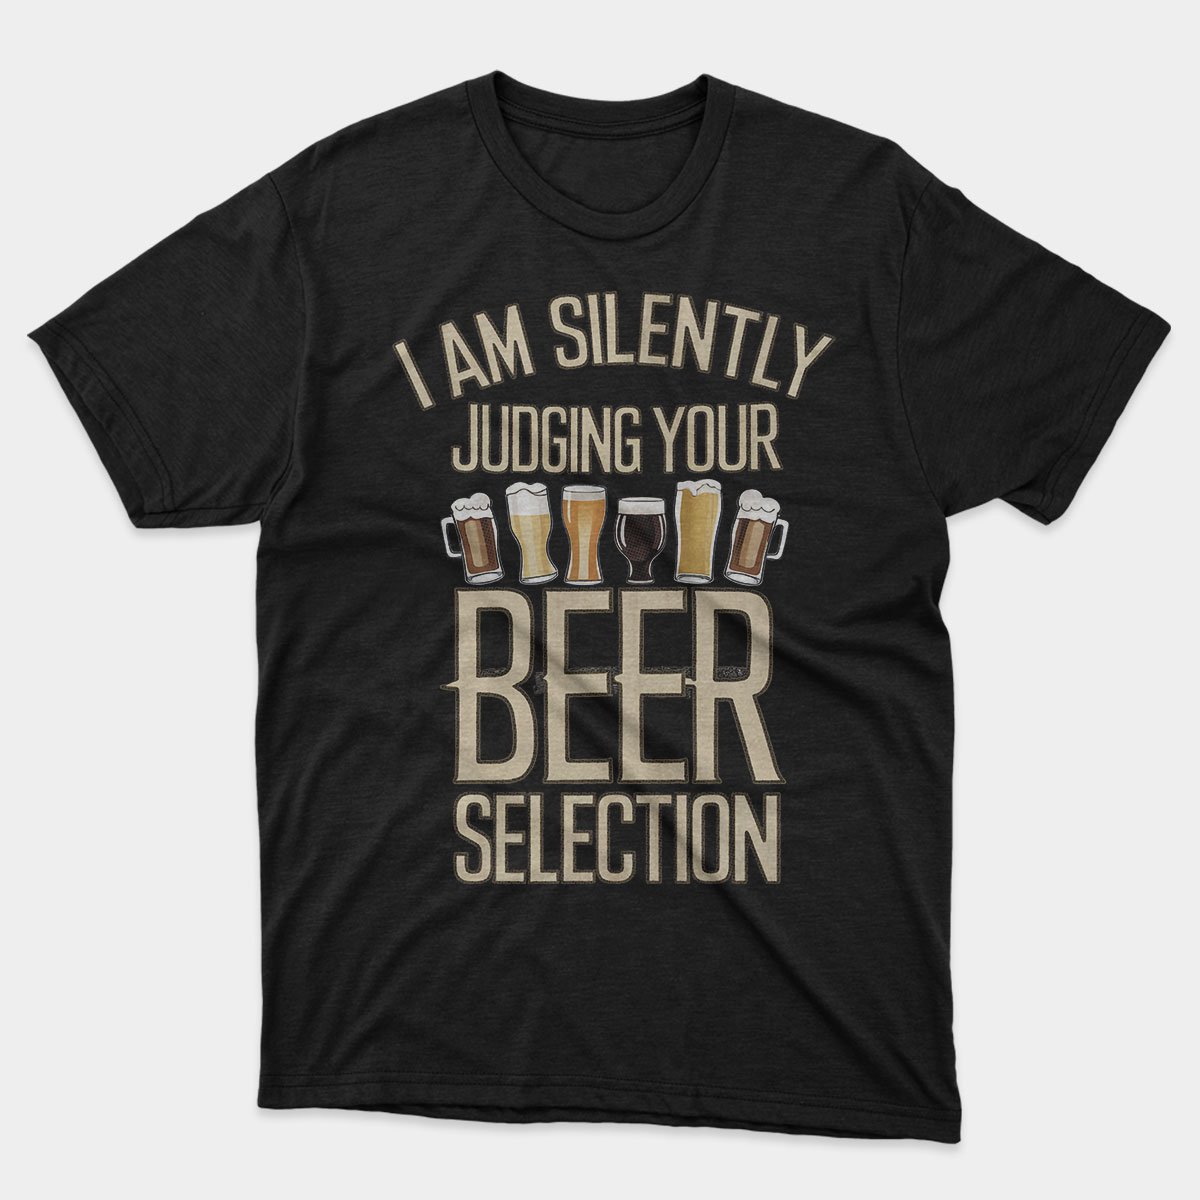 I Am Silently Judging Your Beer Selection T-shirt